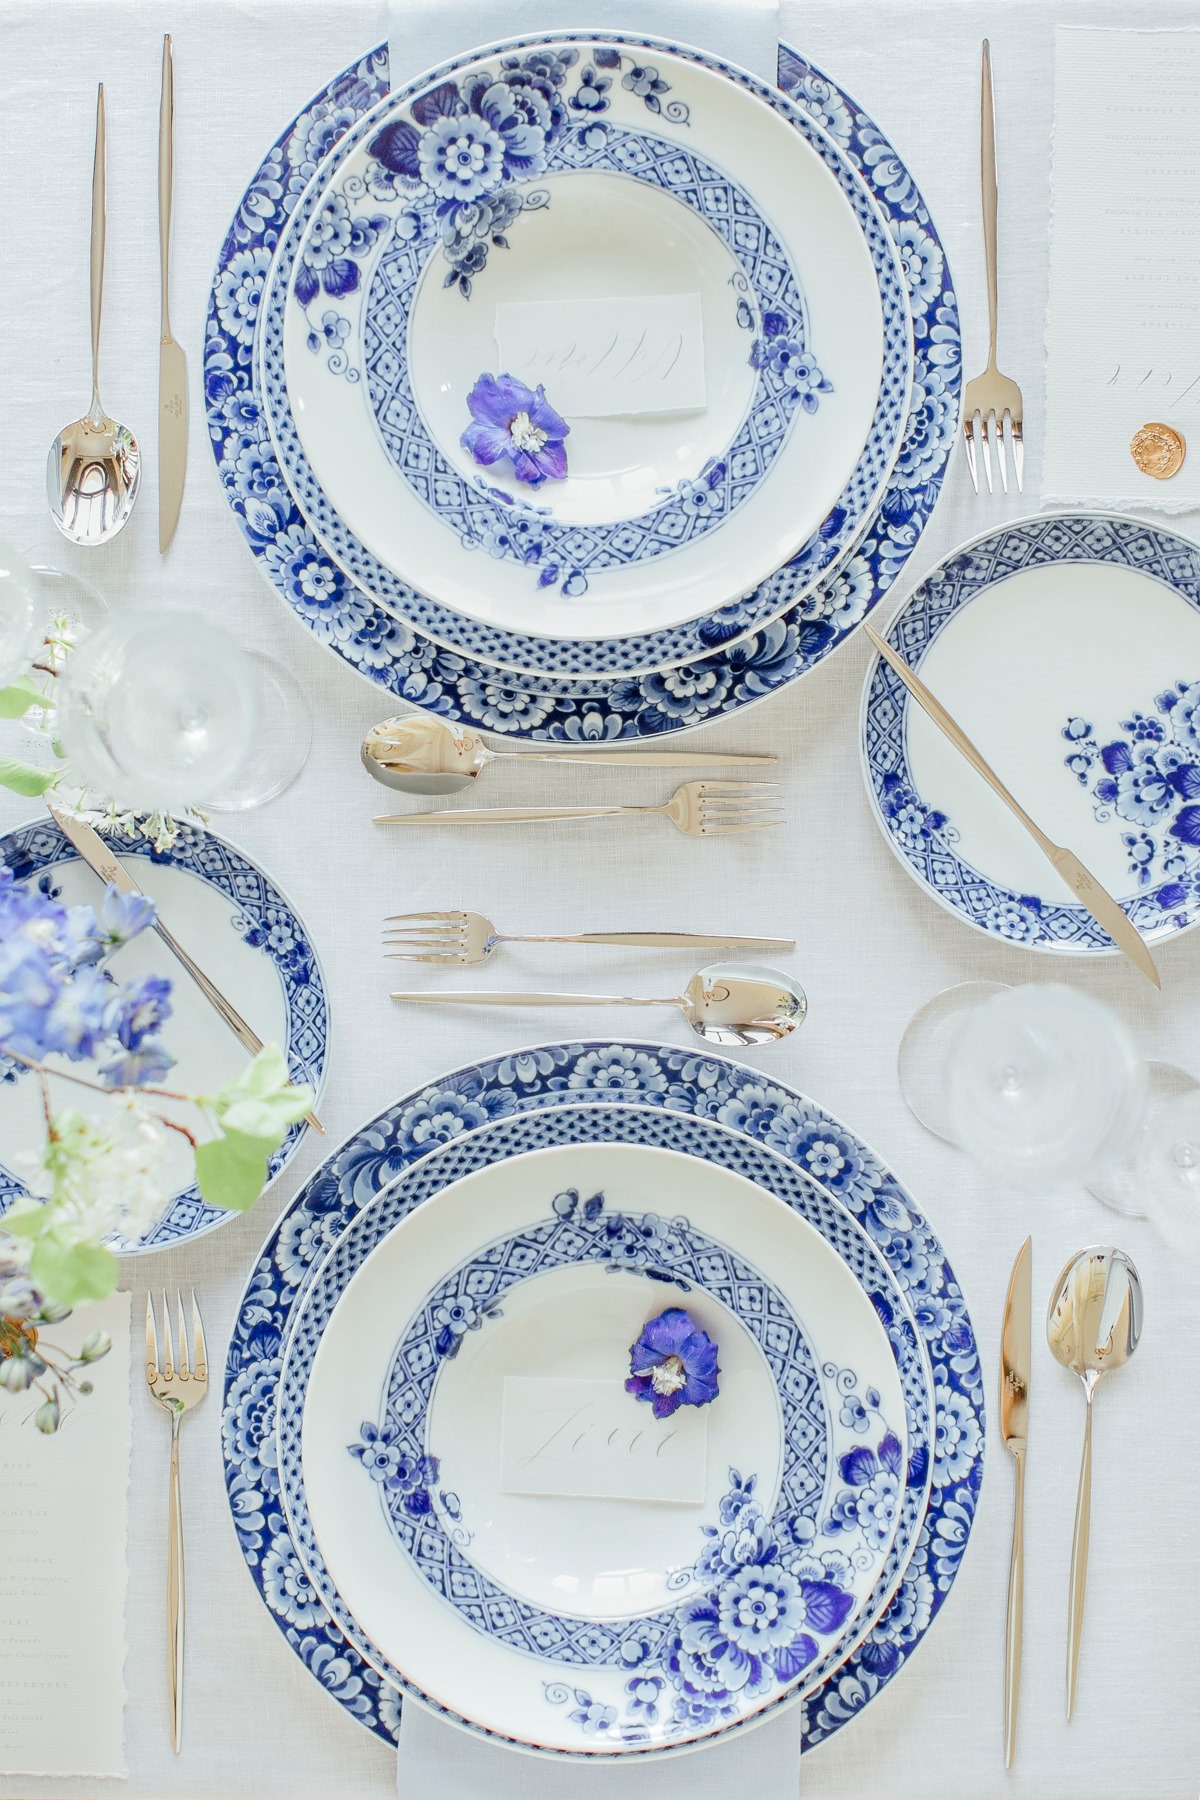 Blue and white wedding table